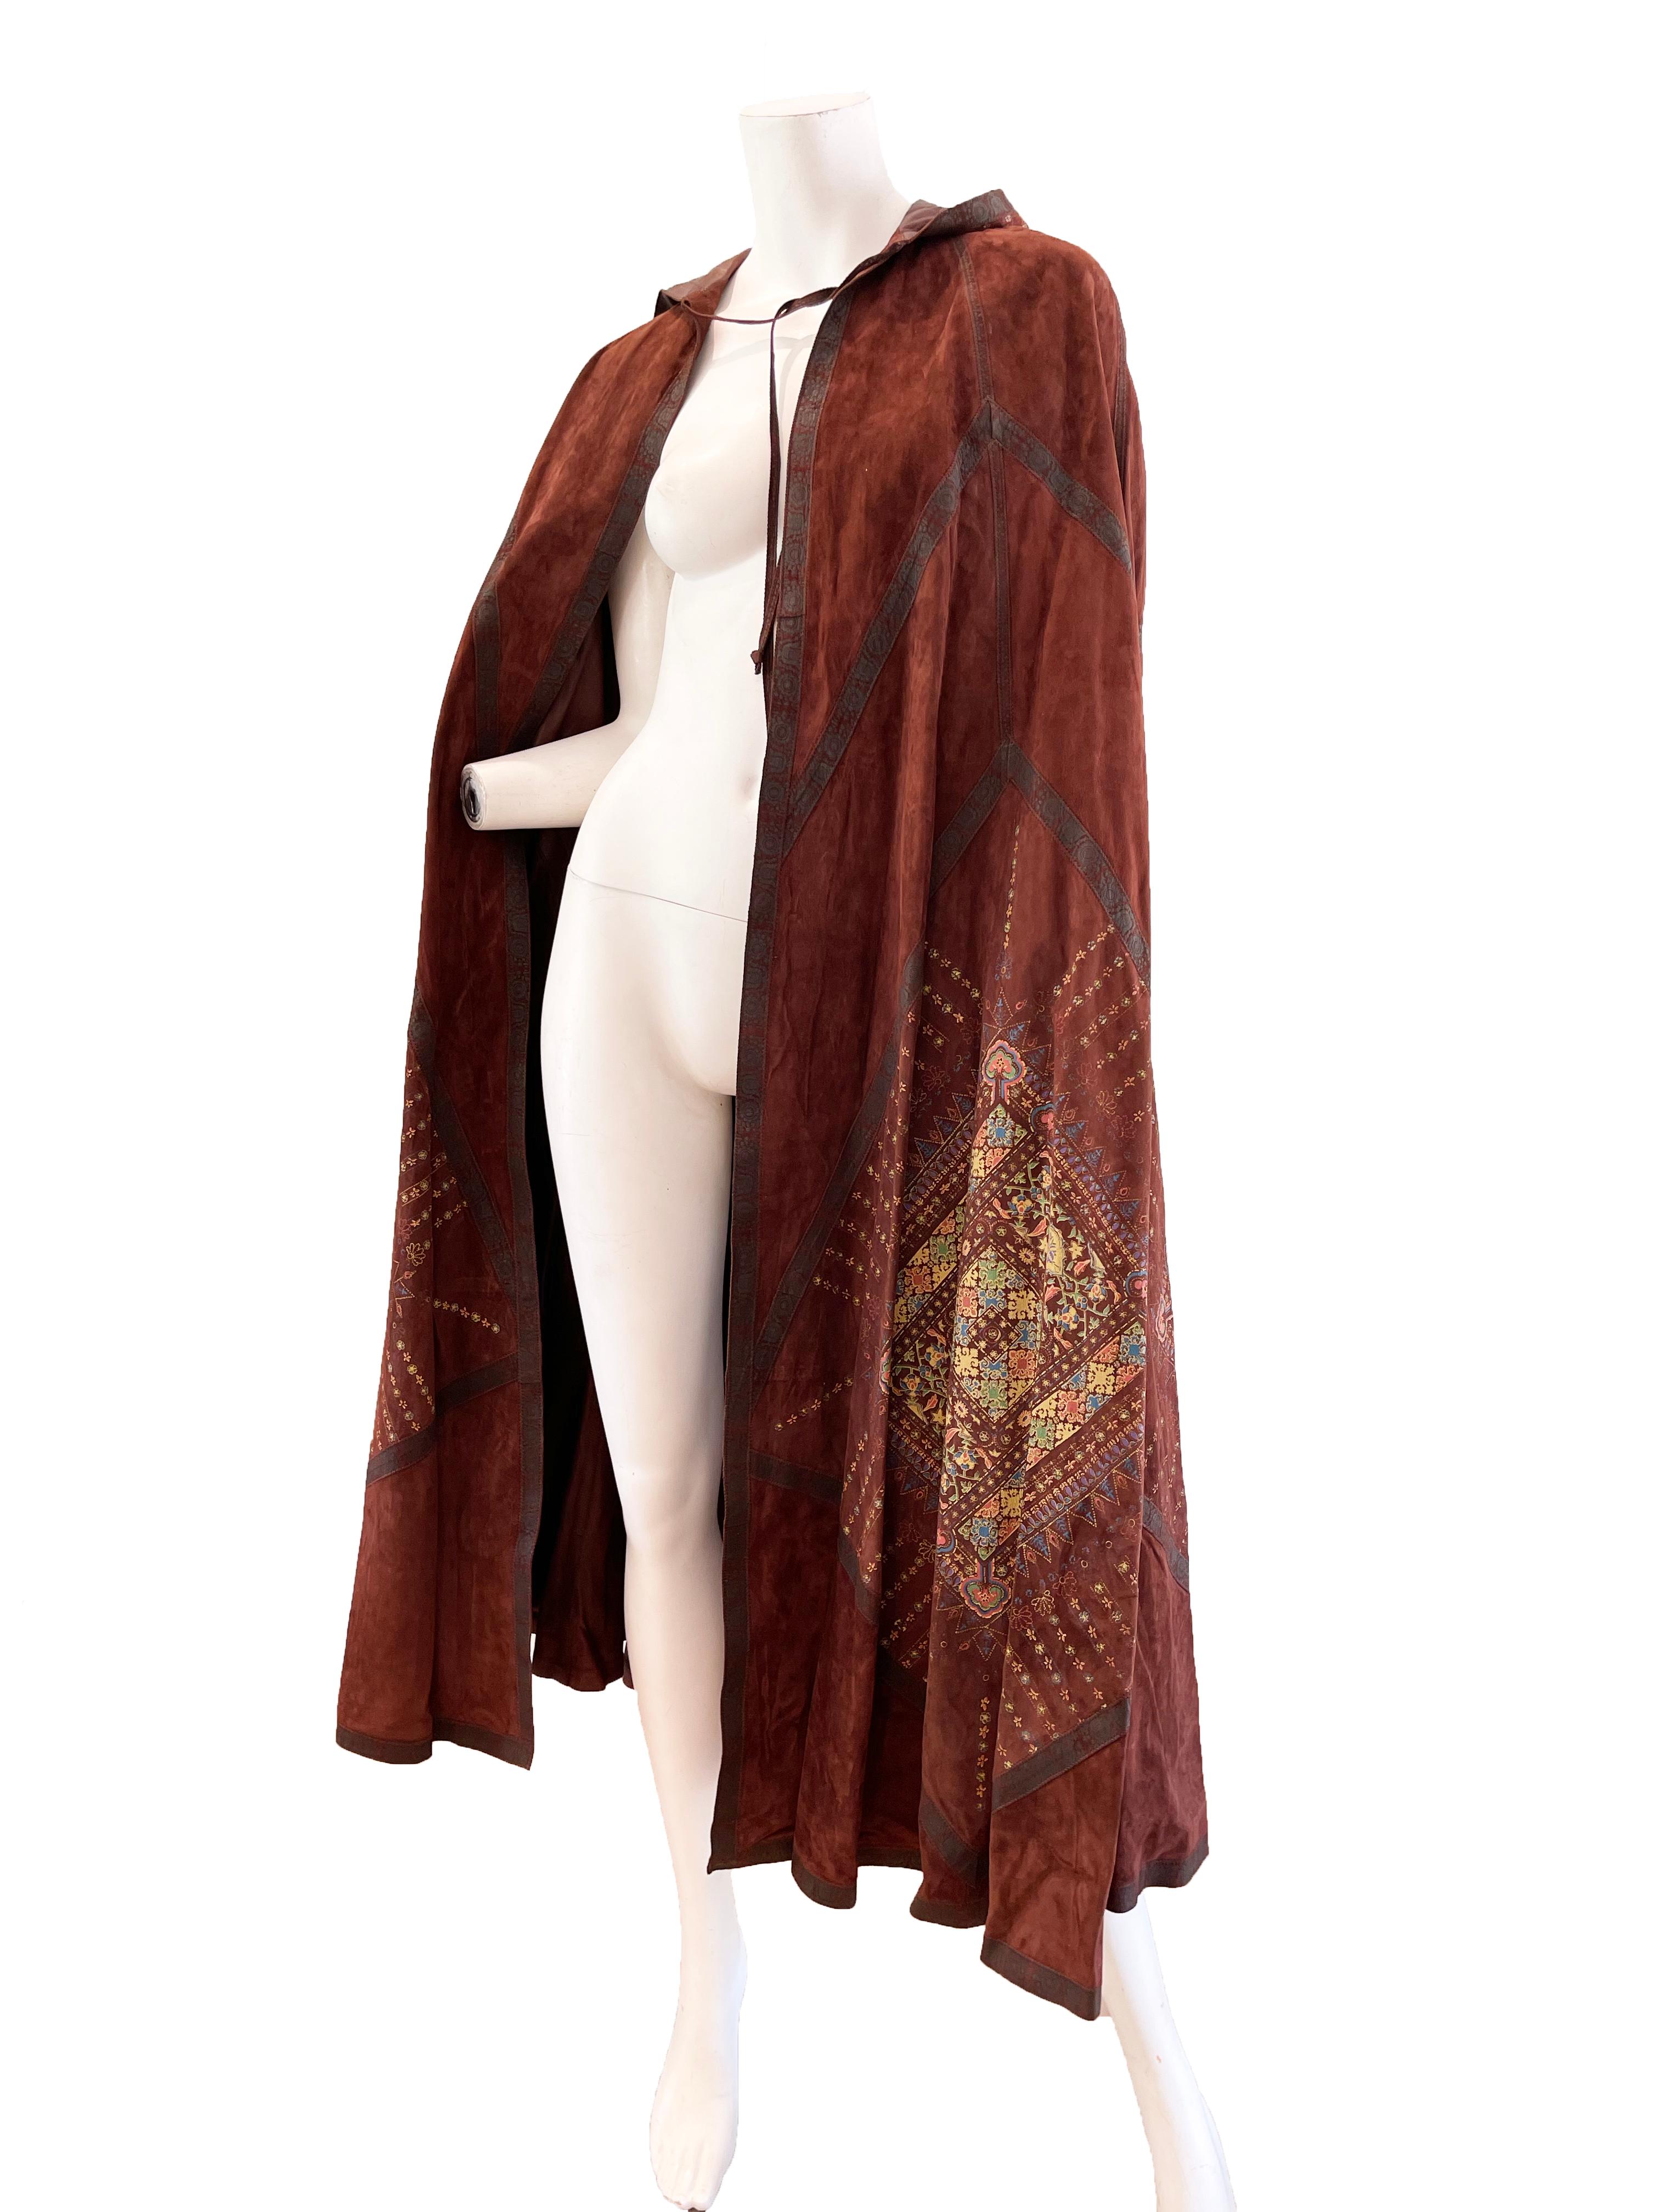 1970s Roberto Cavalli brown suede cape.

Tassel hood
Tie closure at neck
Condition: good, some all over wear
One size